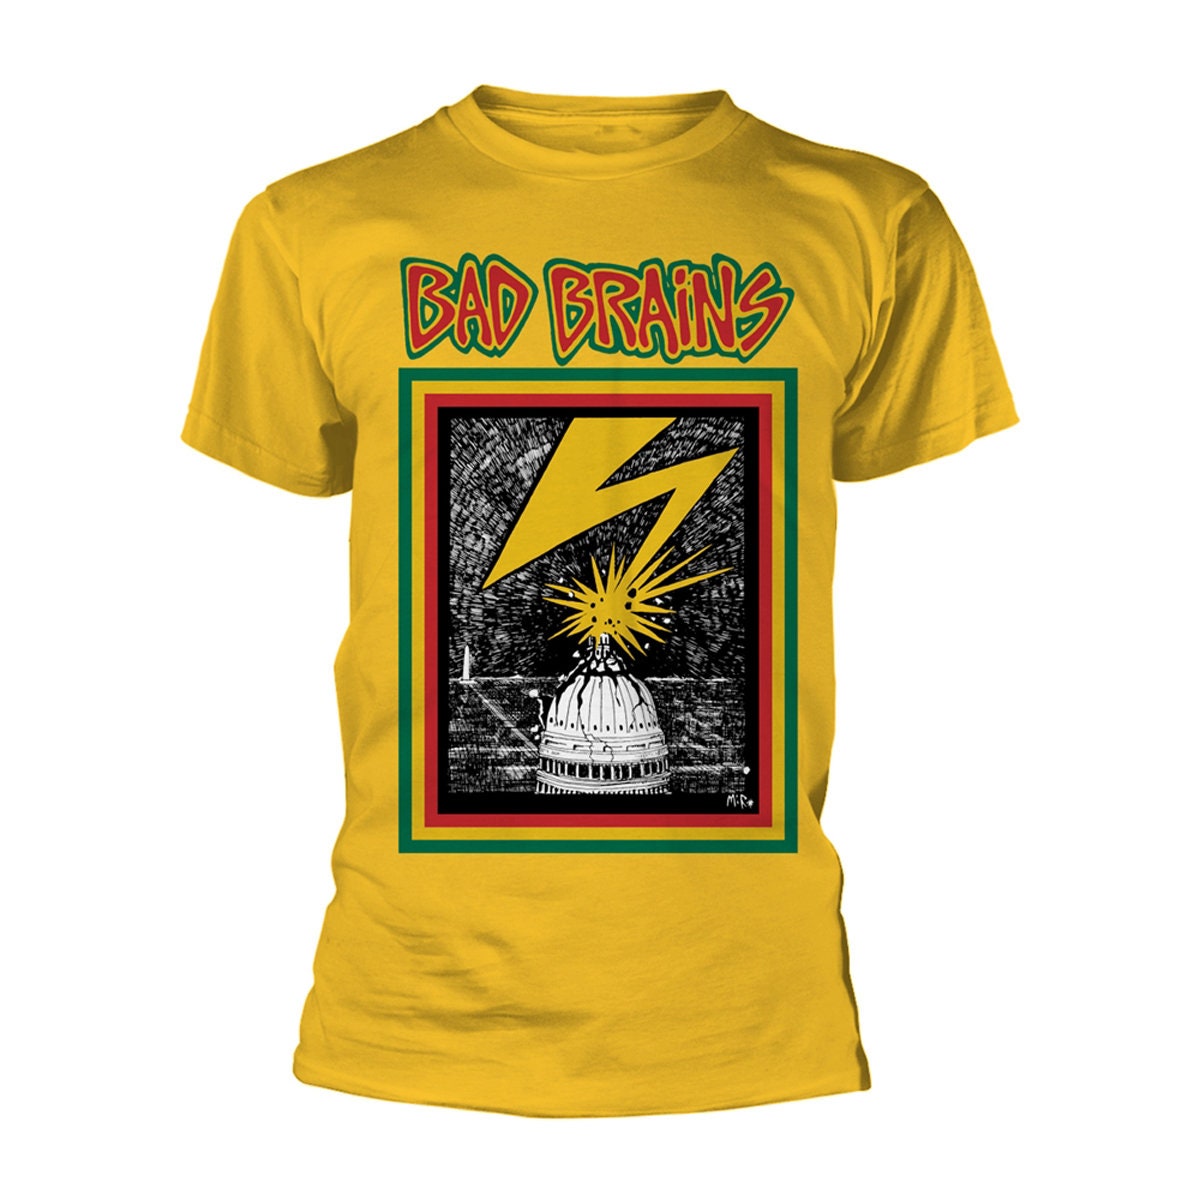 Discover Yellow Bad Brains Rock Punk Official Tee T-Shirt Mens Unisex